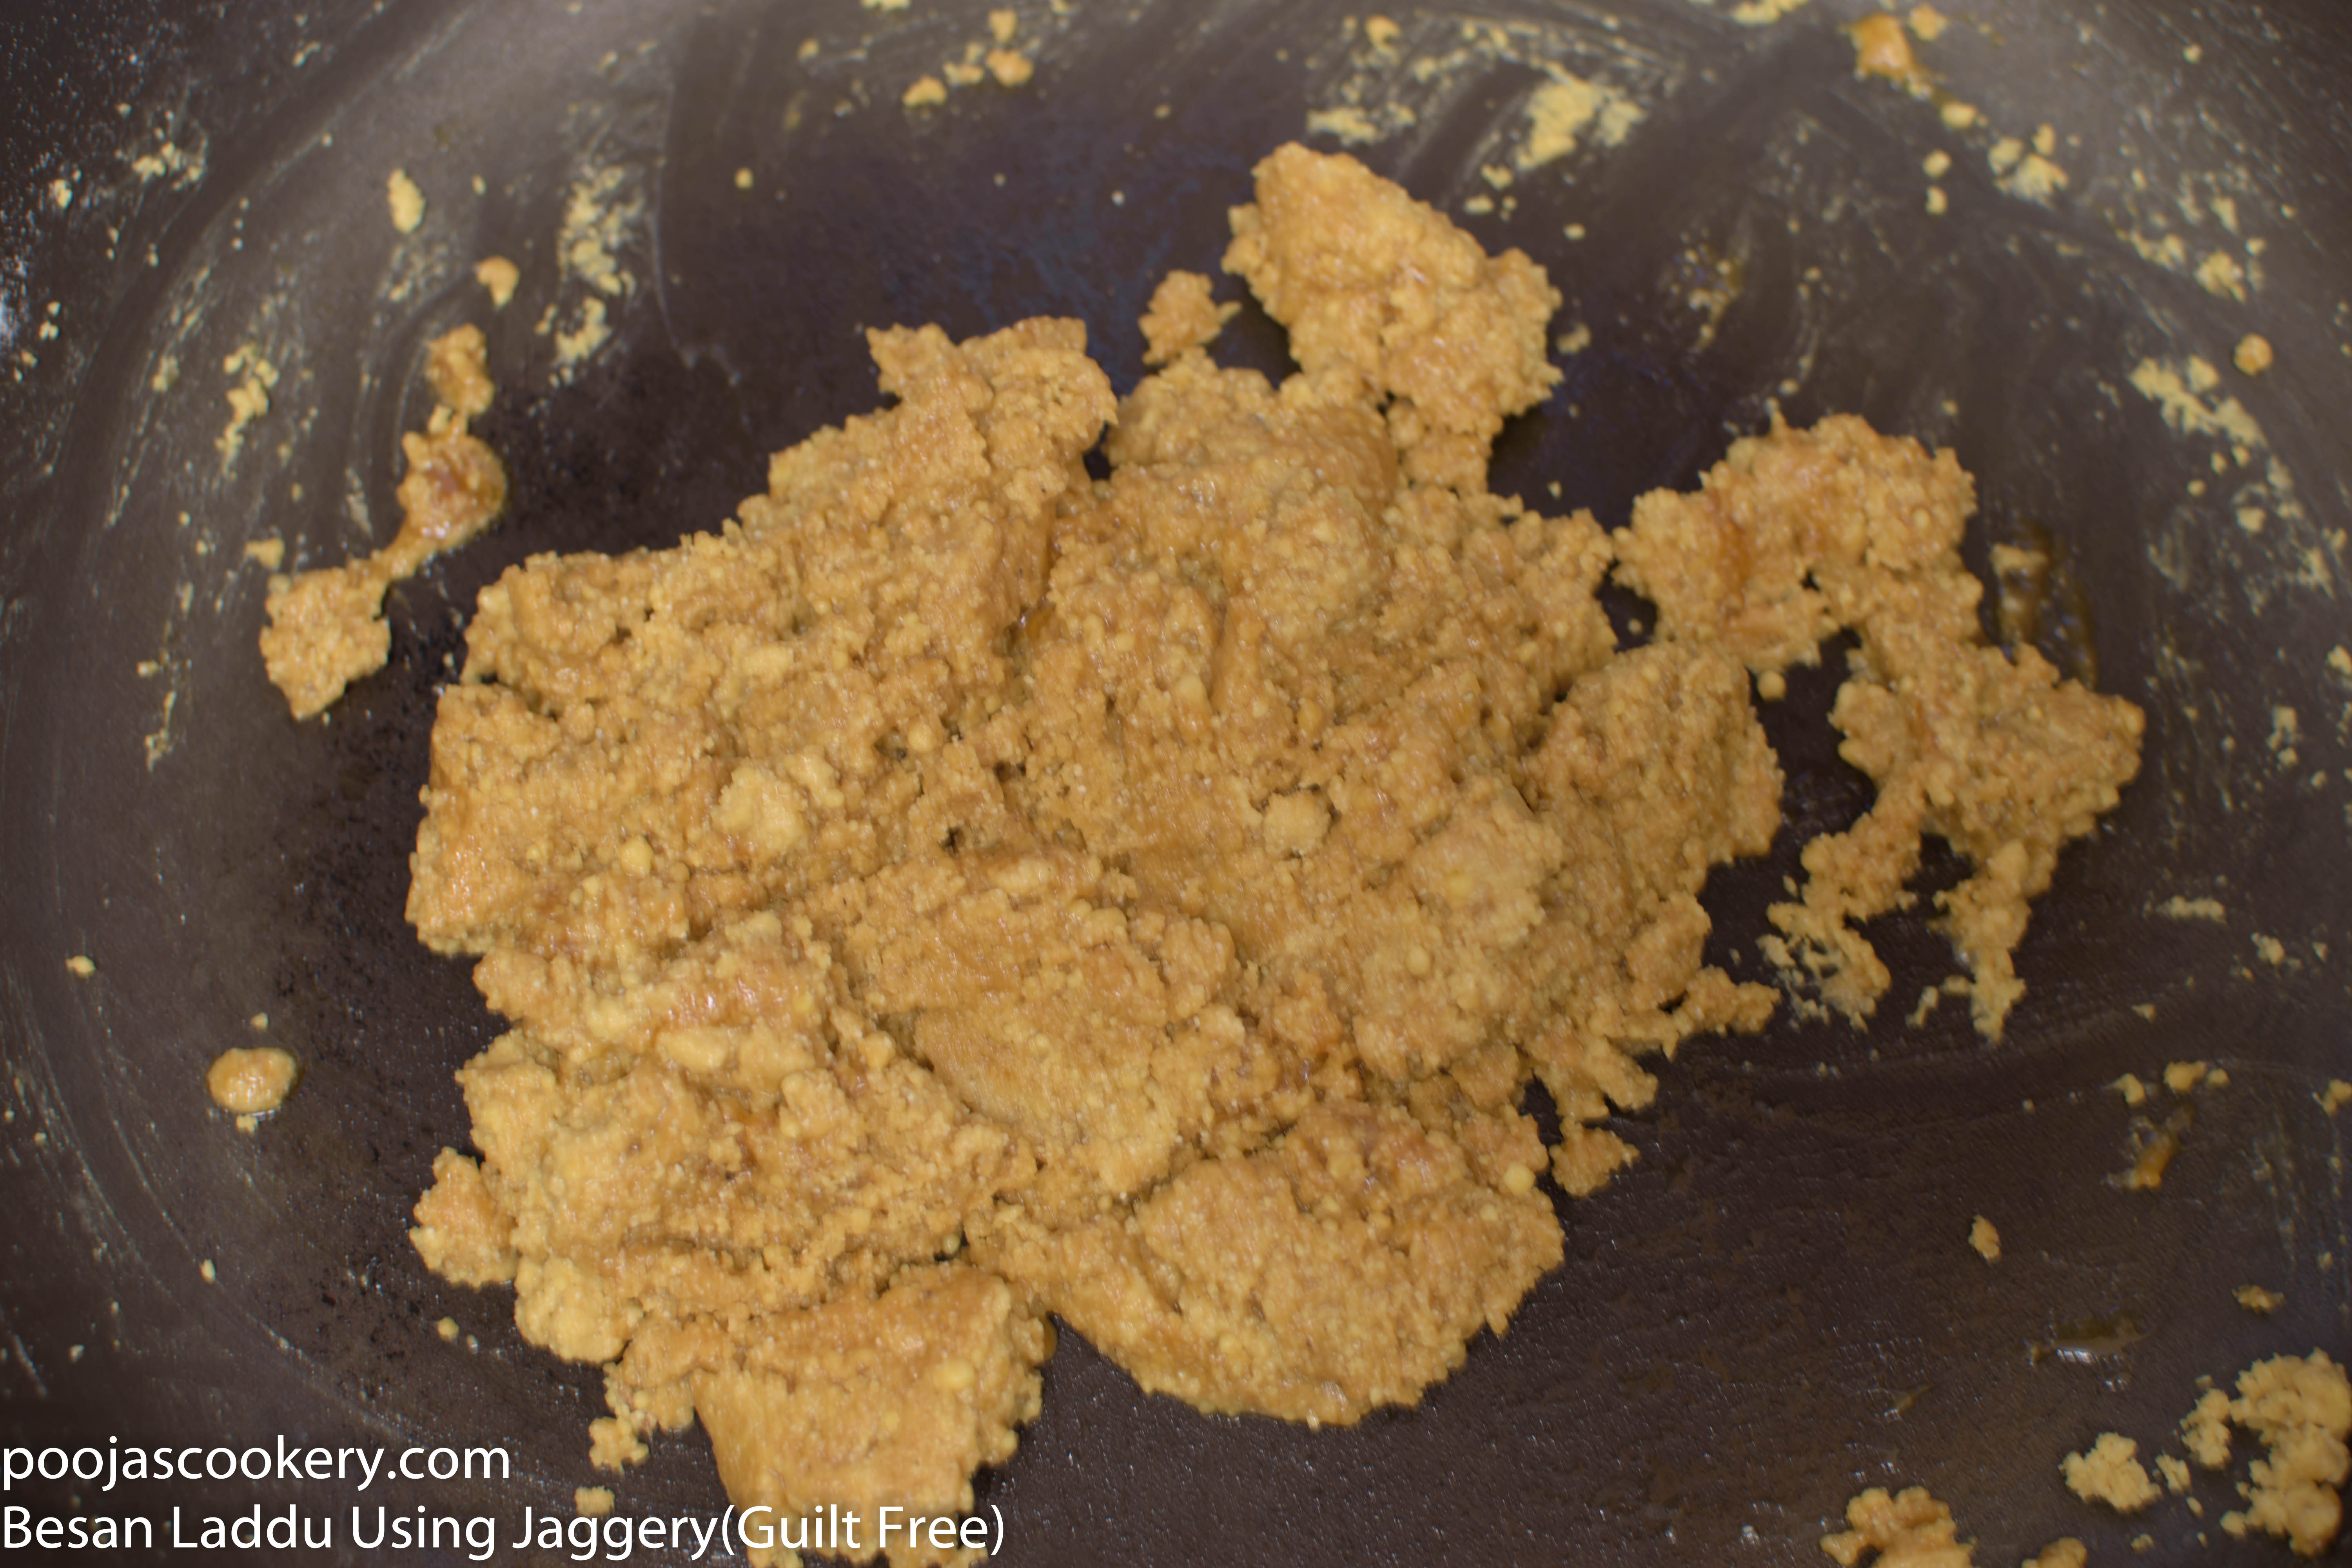 Mix until jaggery is completely melted and mixed